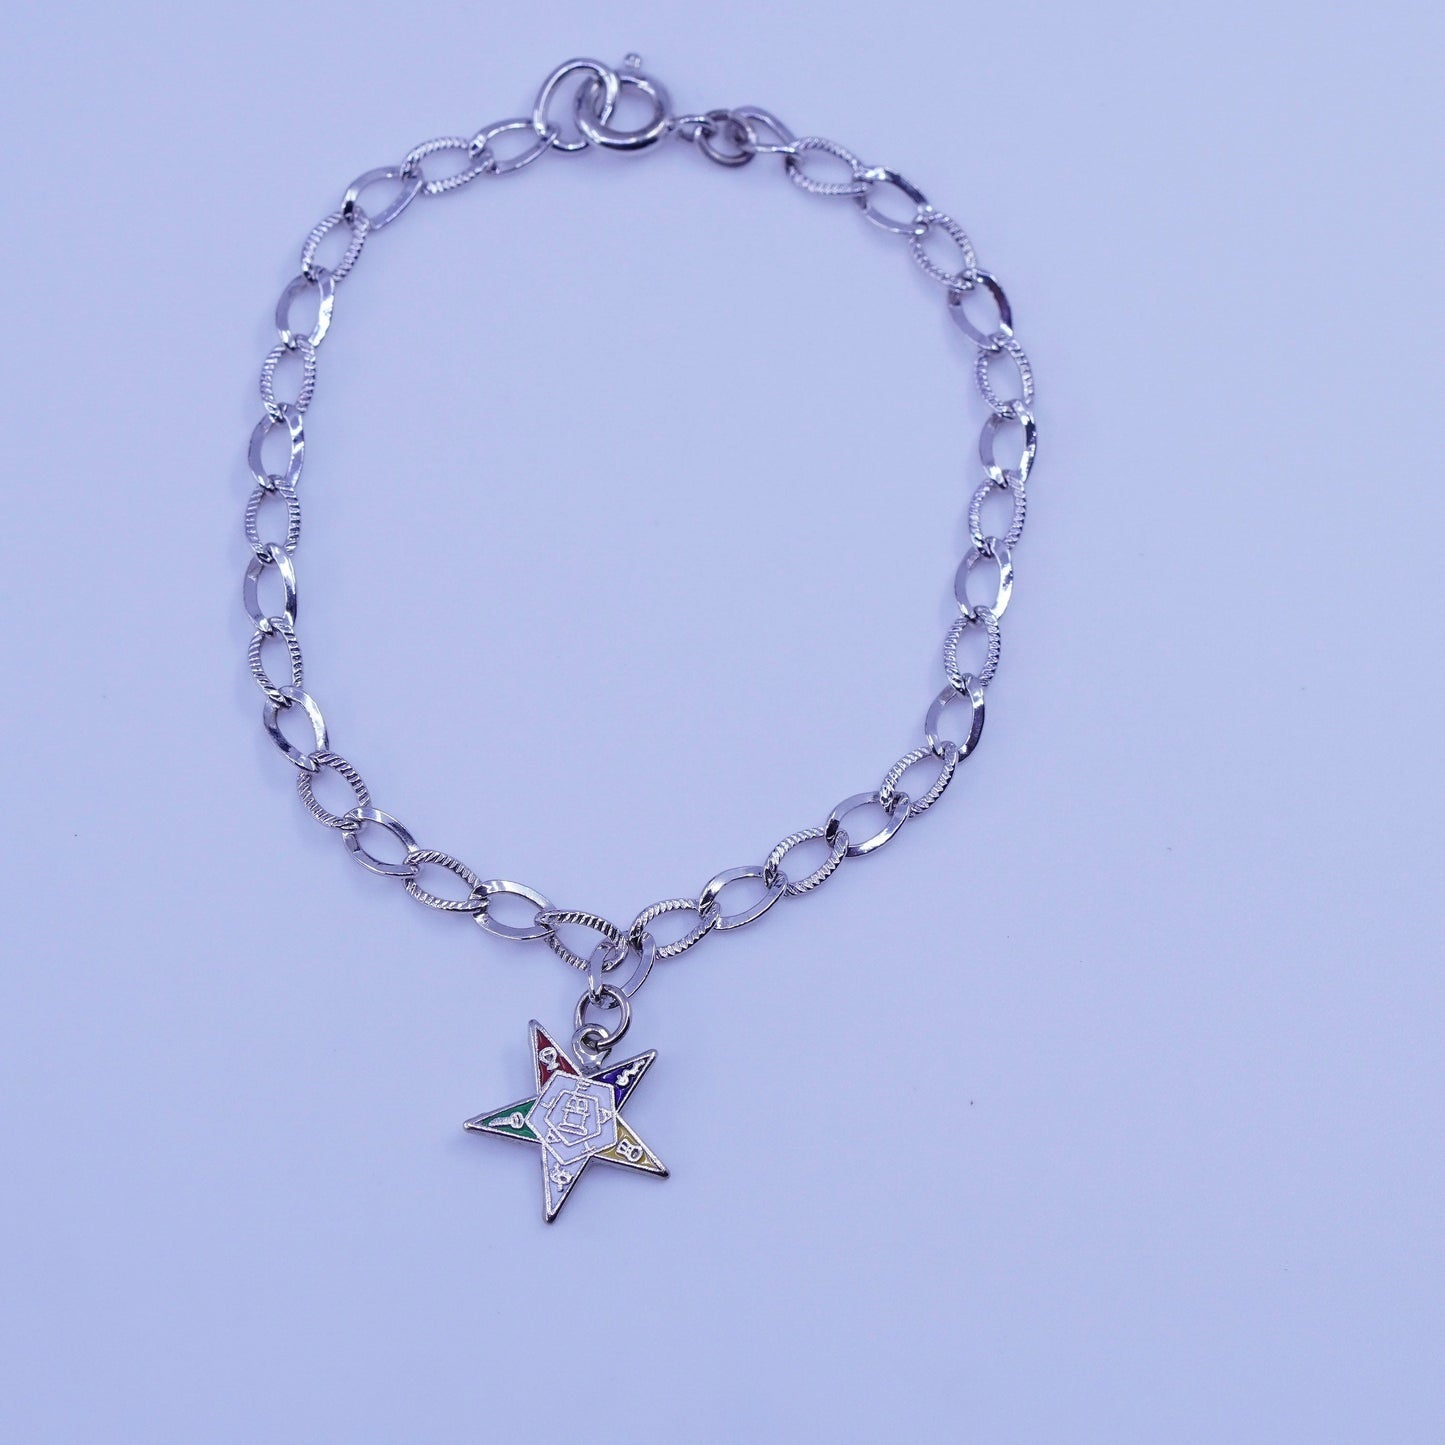 6.75”, Sterling 925 silver handmade bracelet, men’s curb chain with star charm